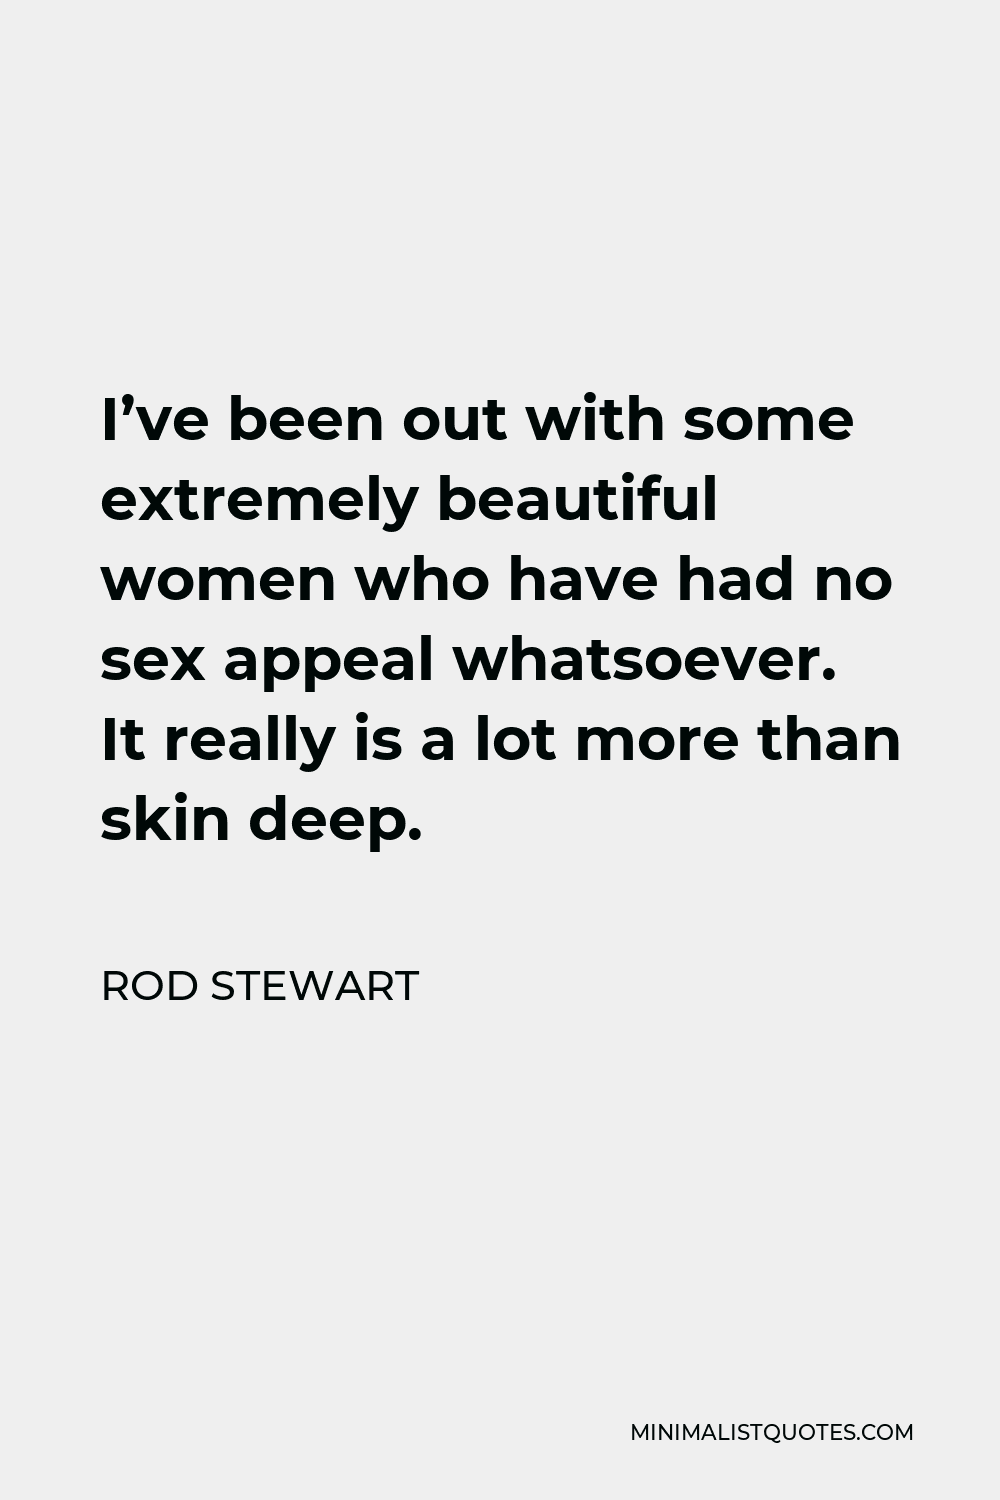 Rod Stewart Quote - I’ve been out with some extremely beautiful women who have had no sex appeal whatsoever. It really is a lot more than skin deep.